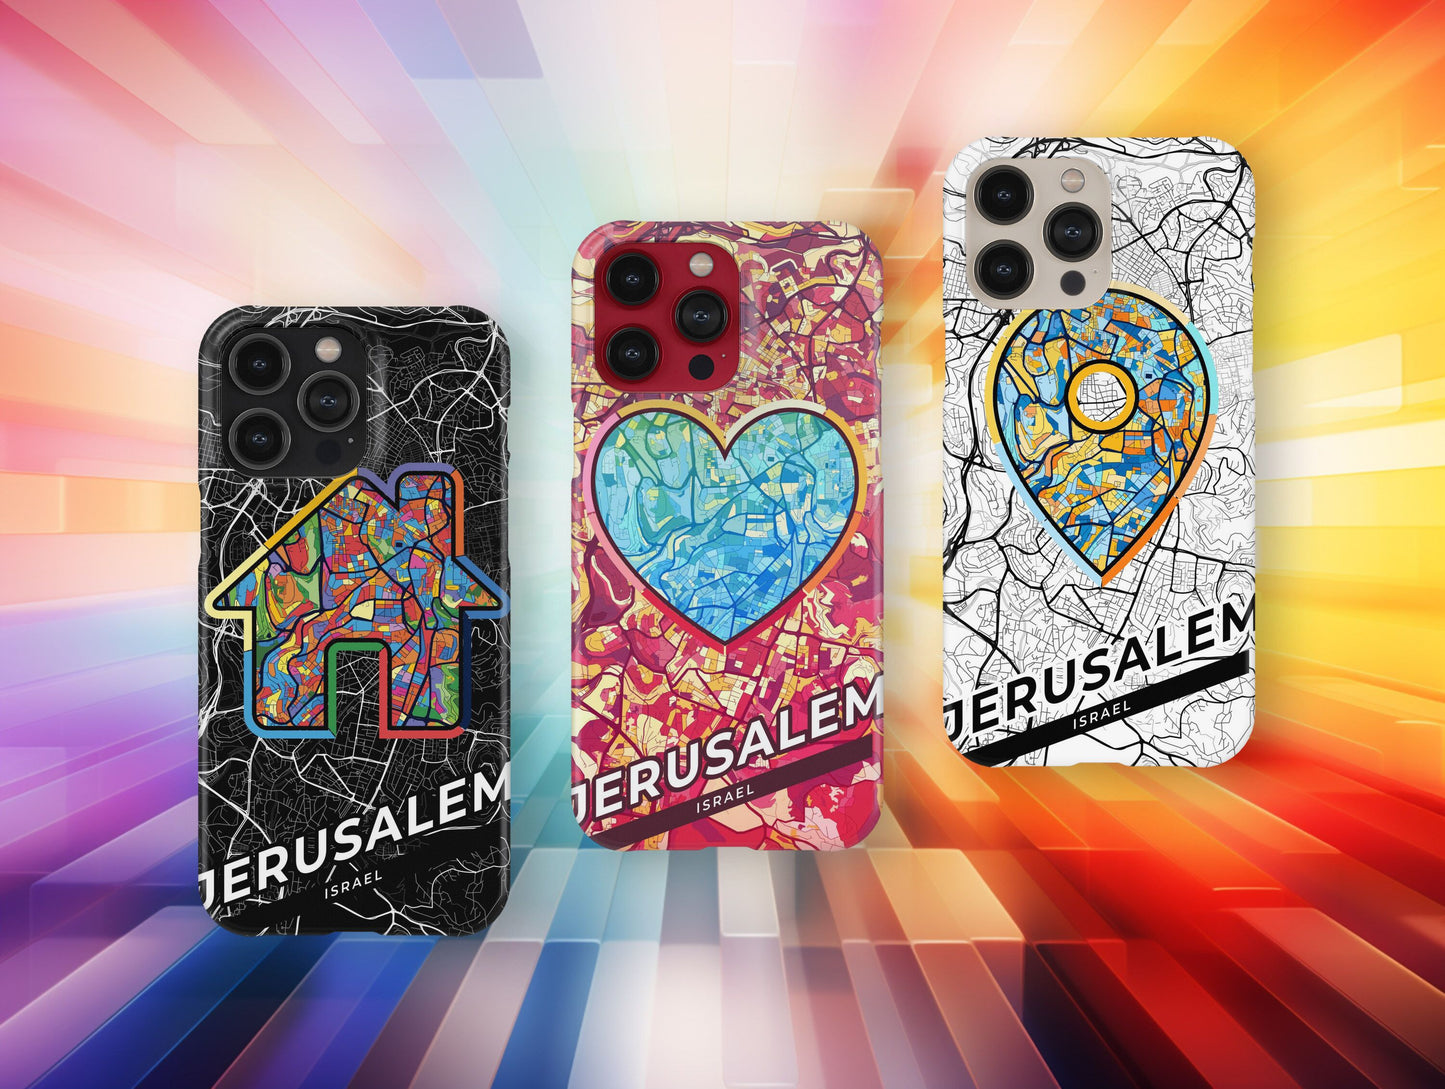 Jerusalem Israel slim phone case with colorful icon. Birthday, wedding or housewarming gift. Couple match cases.